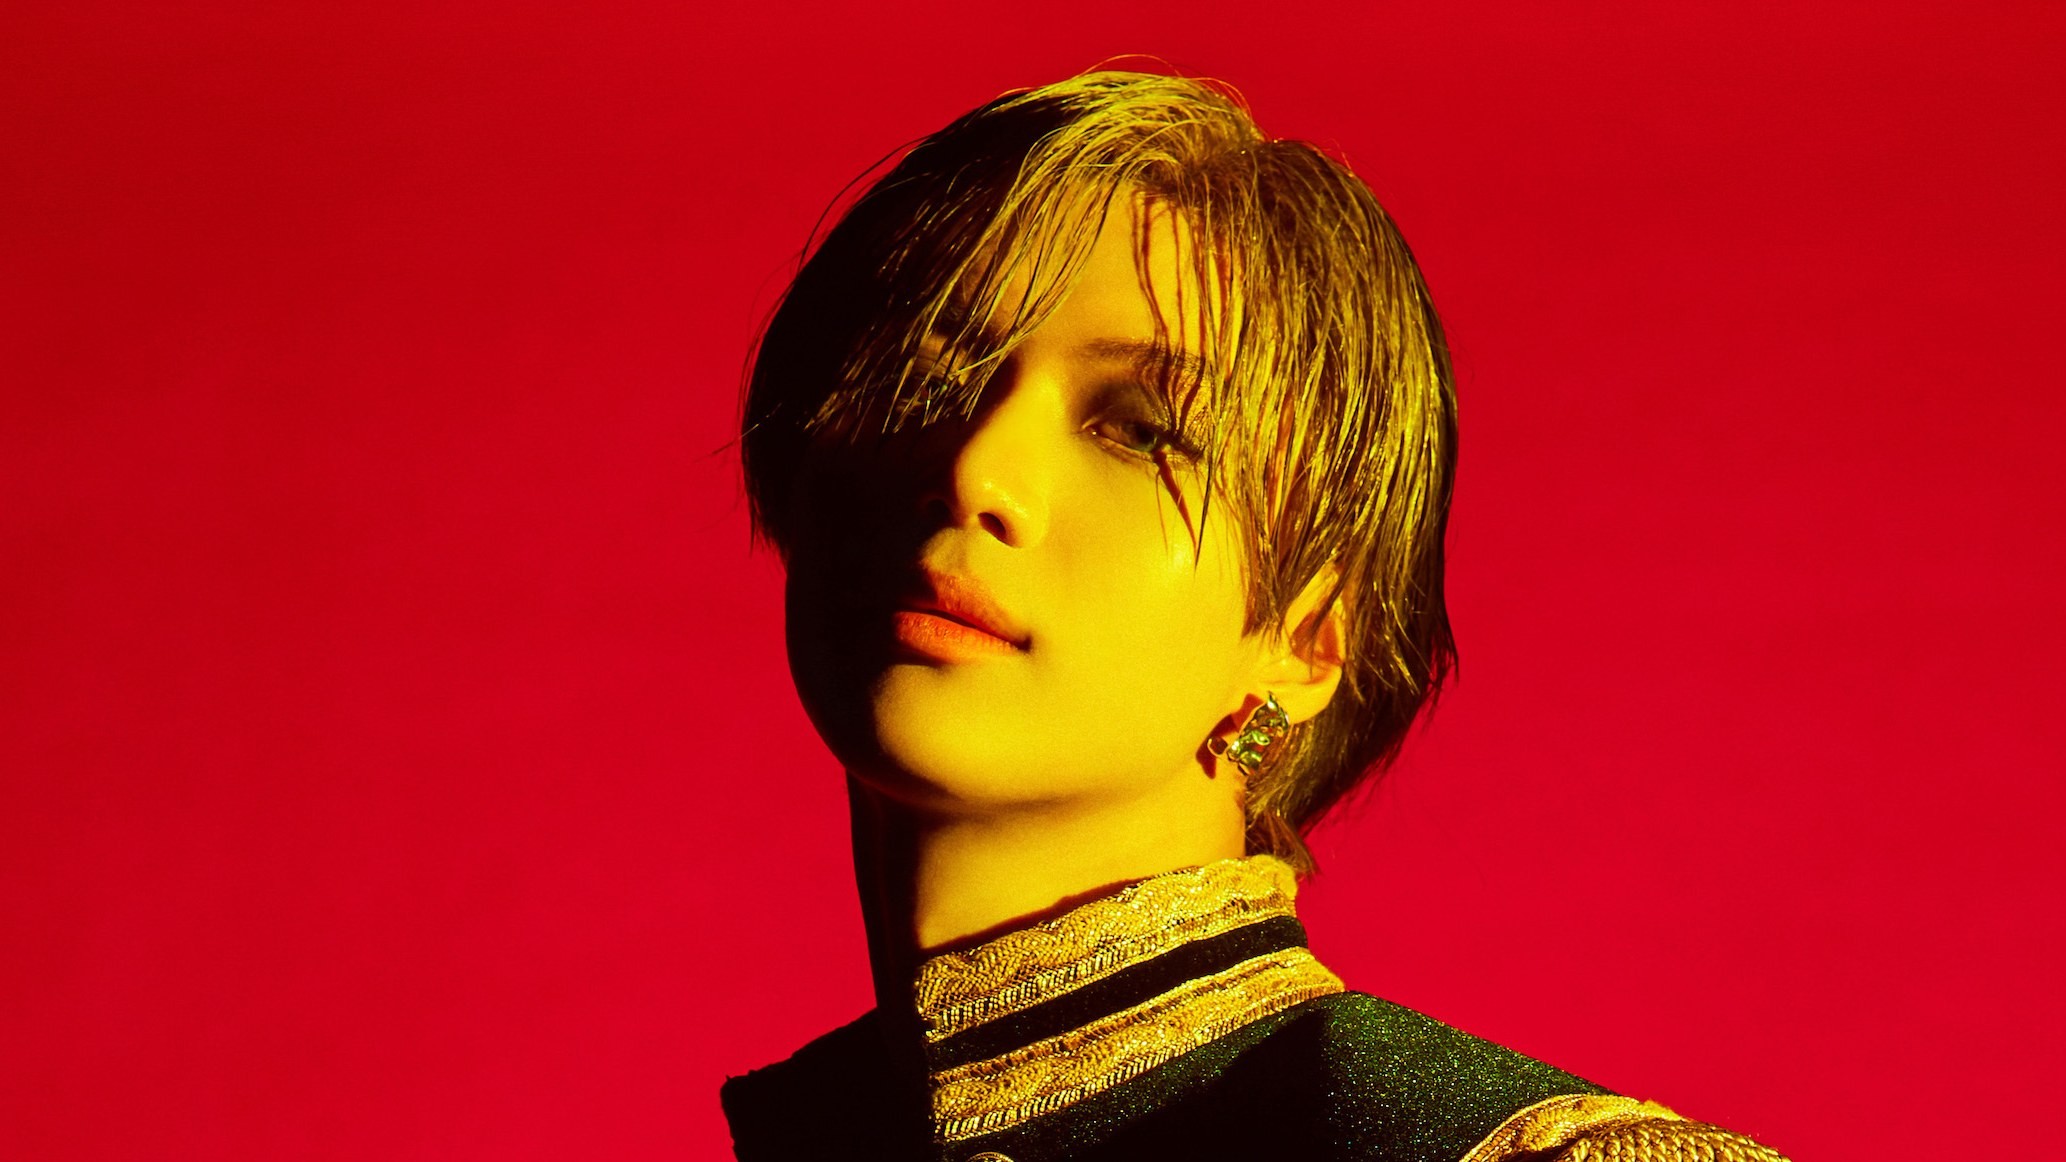 Taemin from Shinee and Super M.